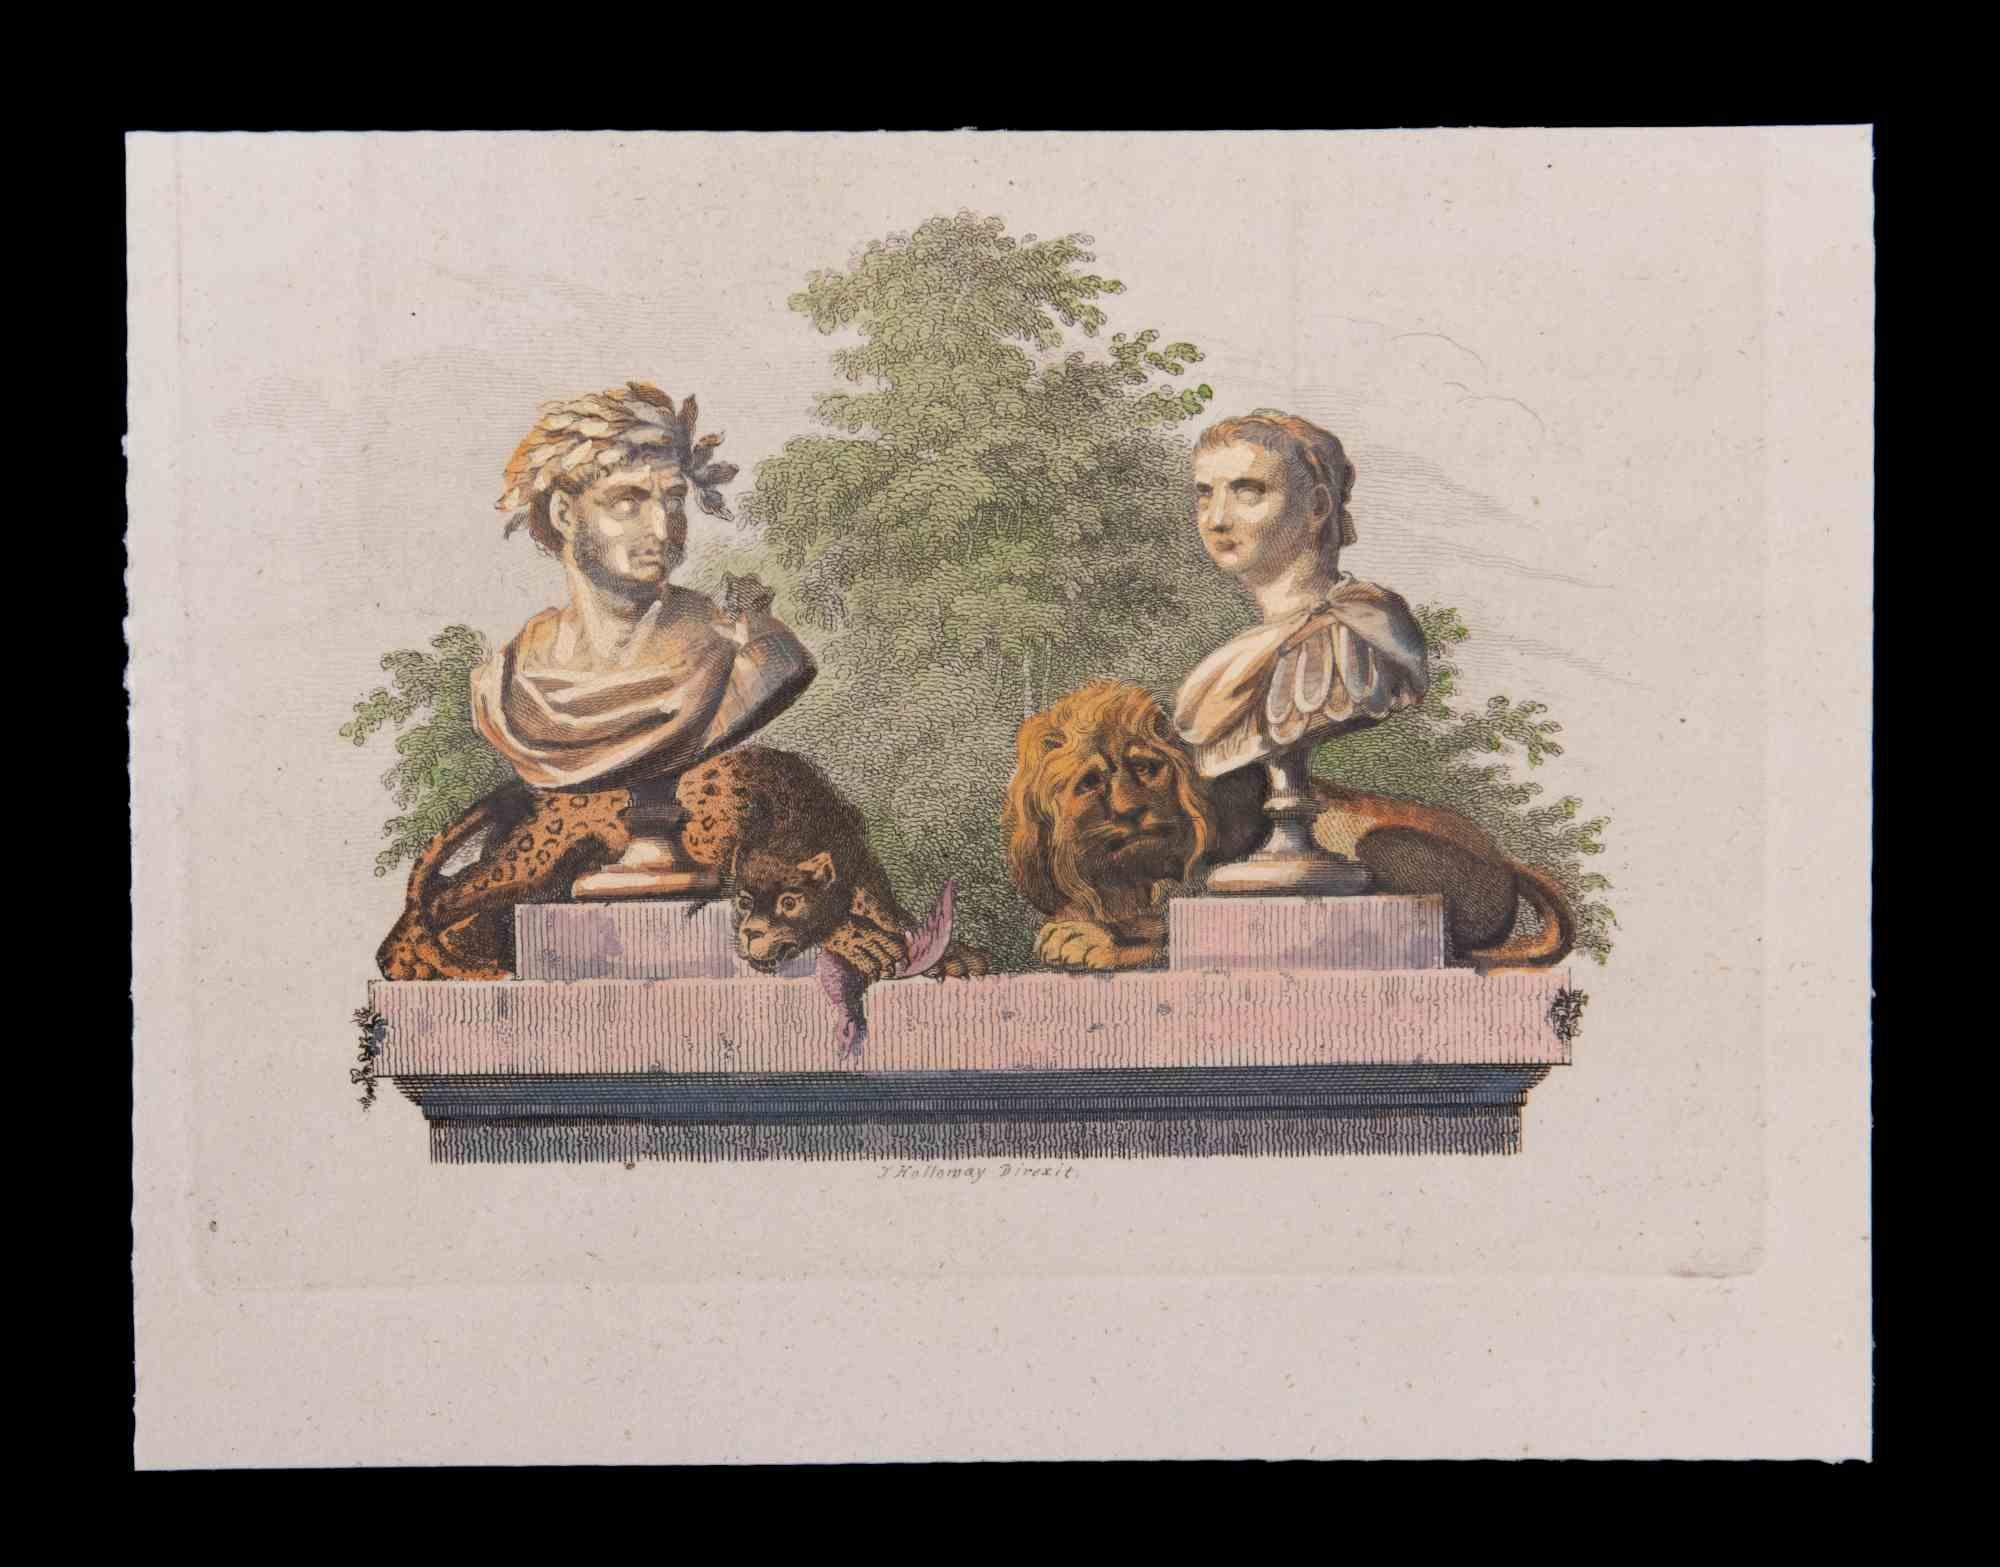 The Statue is an Original Etching hand watercolored realized by Thomas Holloway in the late 18th Century.

The artwork is in good condition.

Stamp Signed on the lower margin.